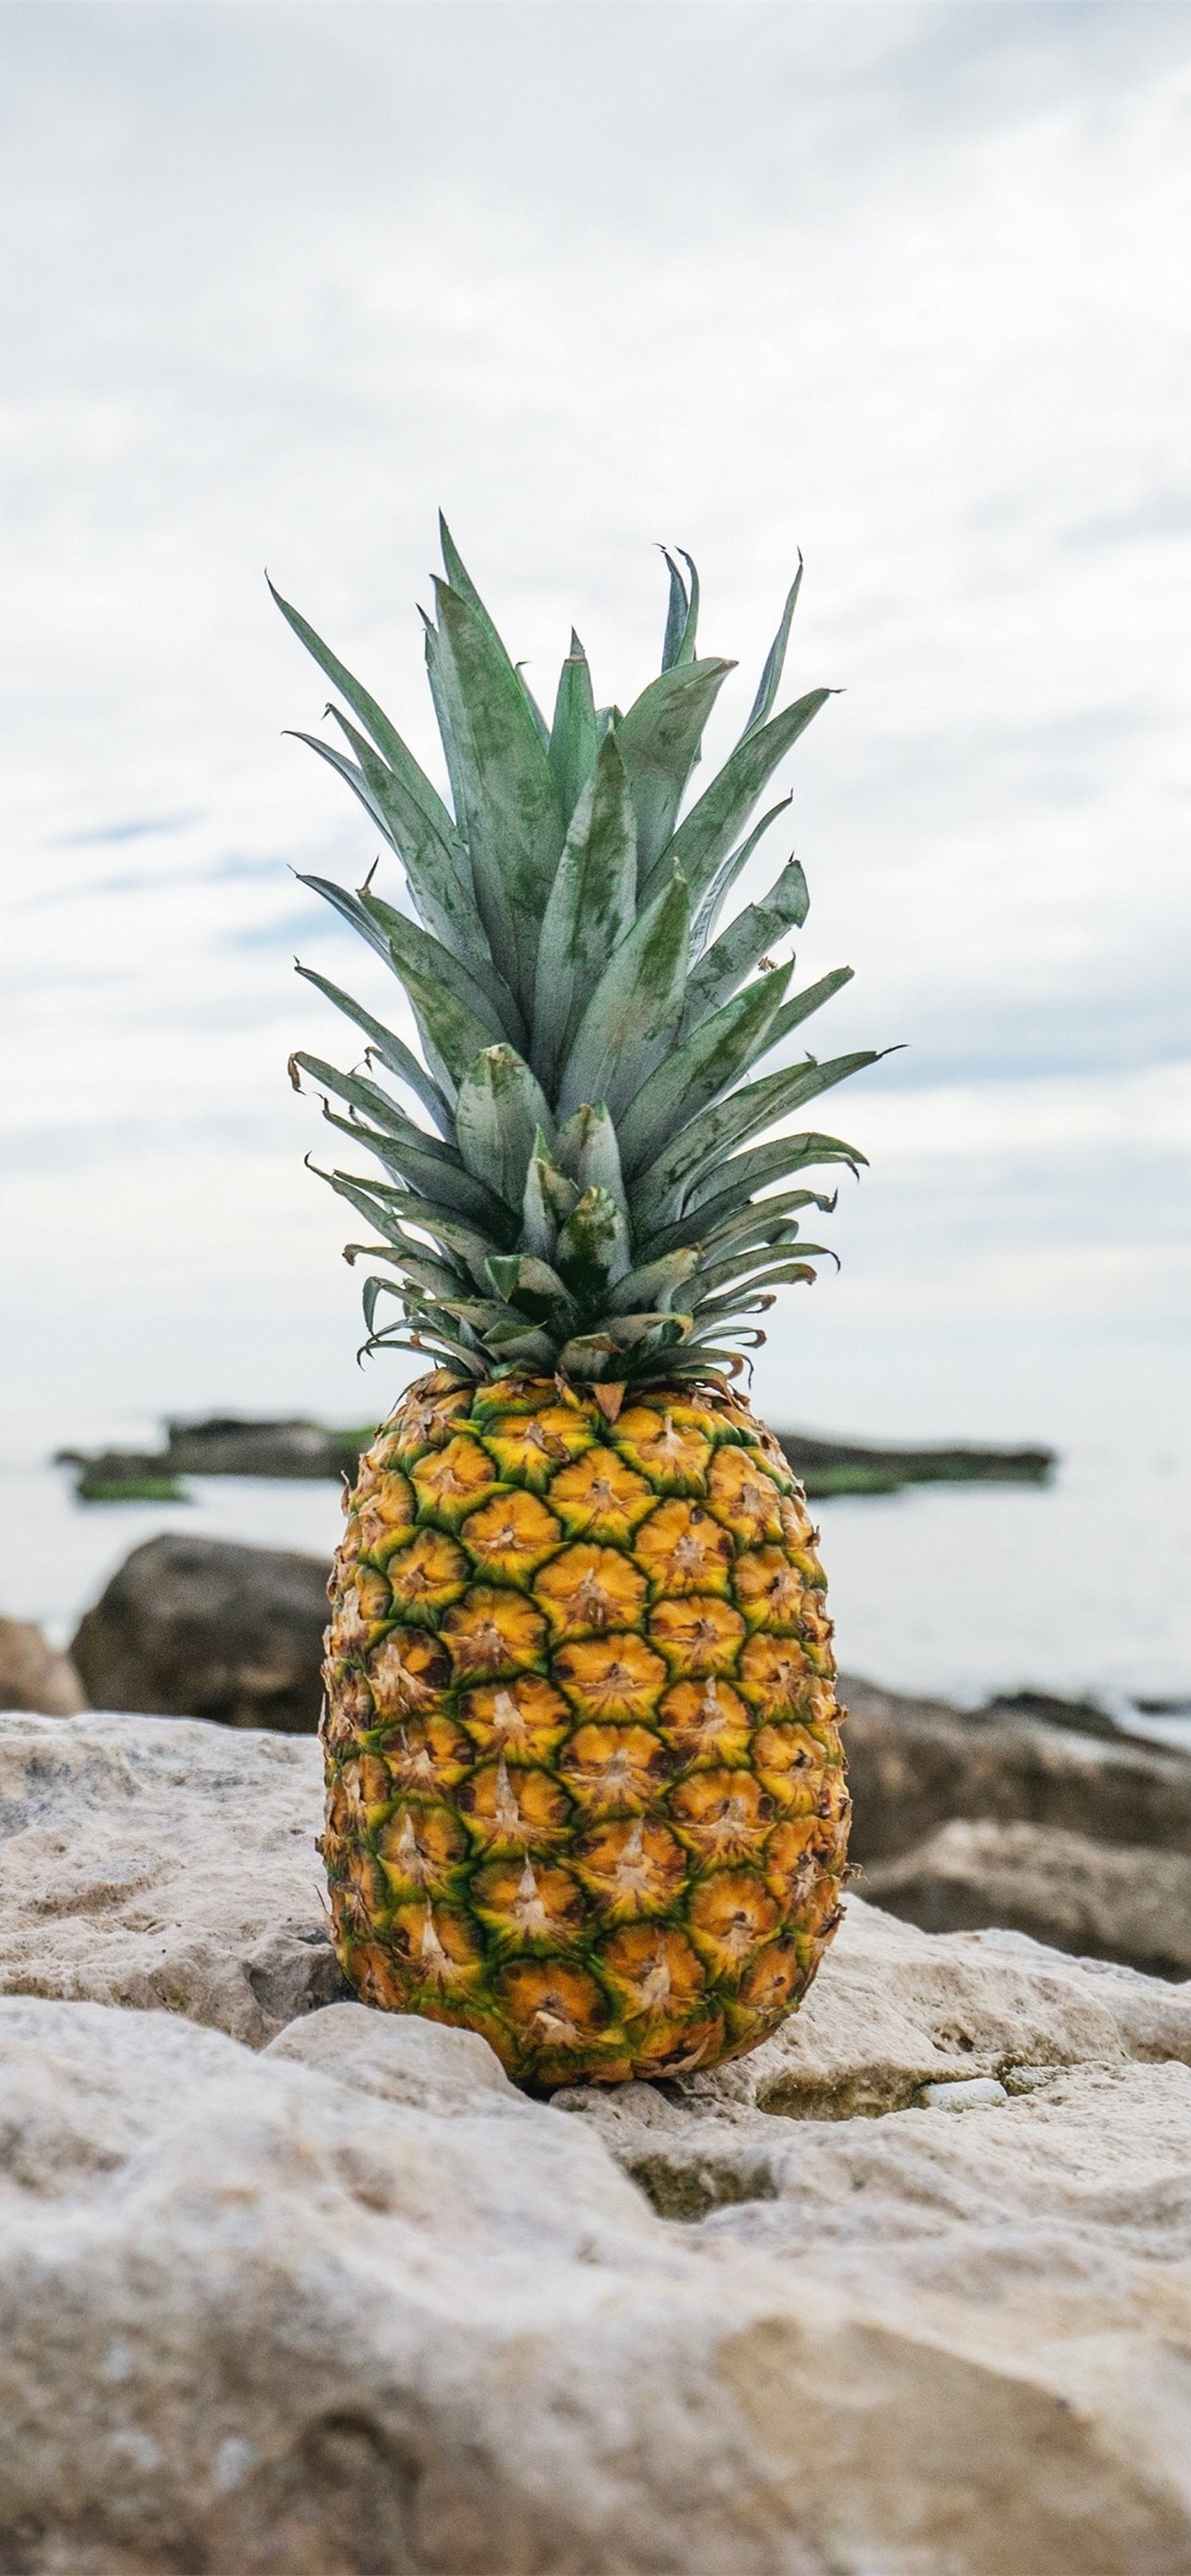 pineapple in water iPhone X Wallpapers Free Download